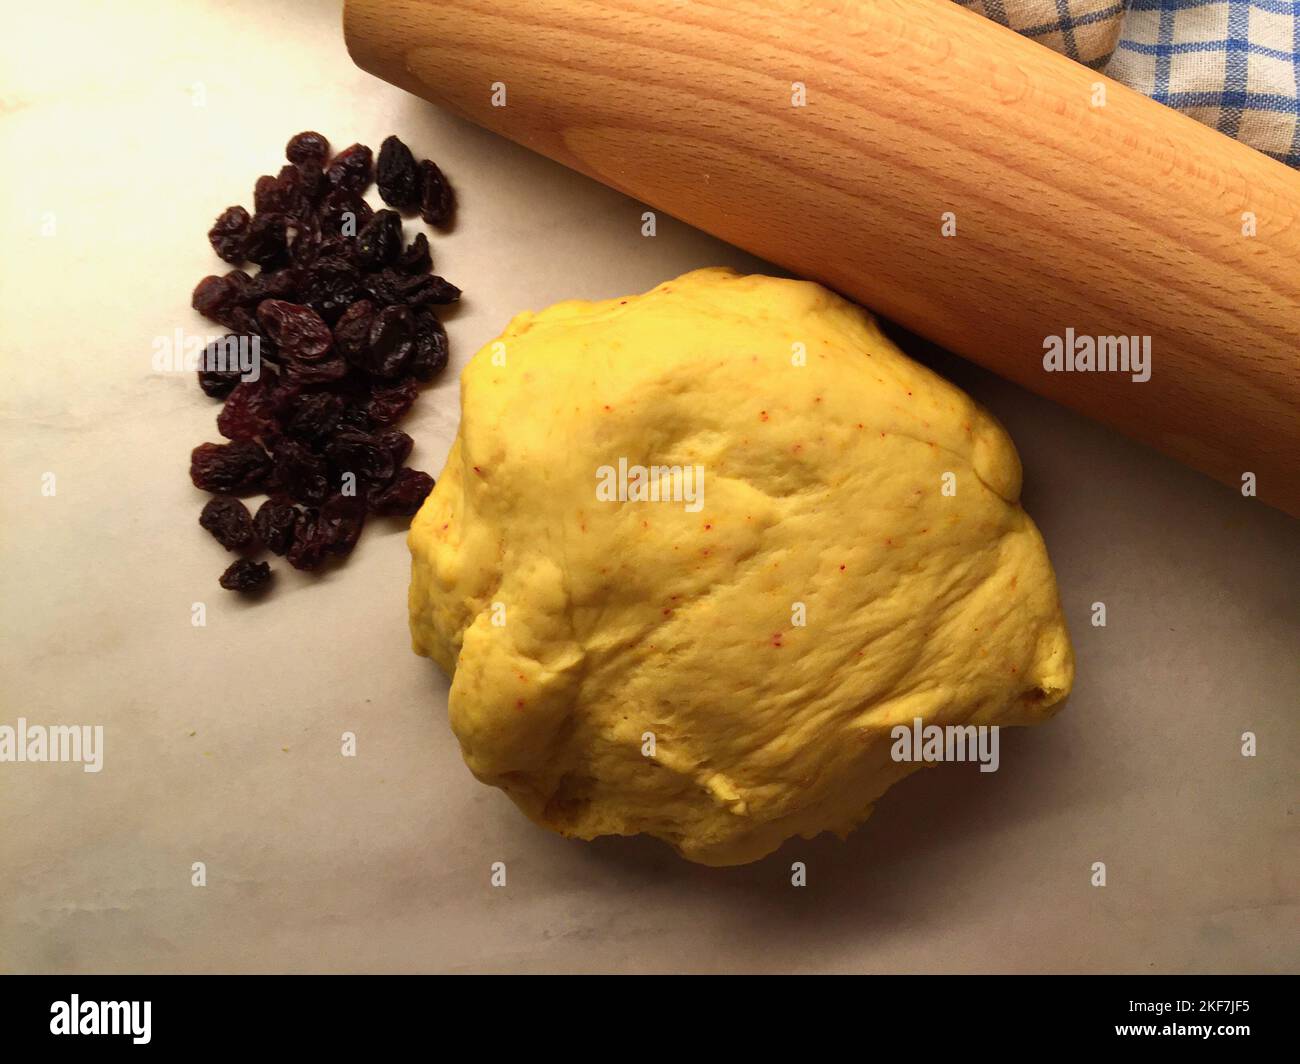 Saffron dough and raisins on a baking table for baking buns for December holidays. Stock Photo